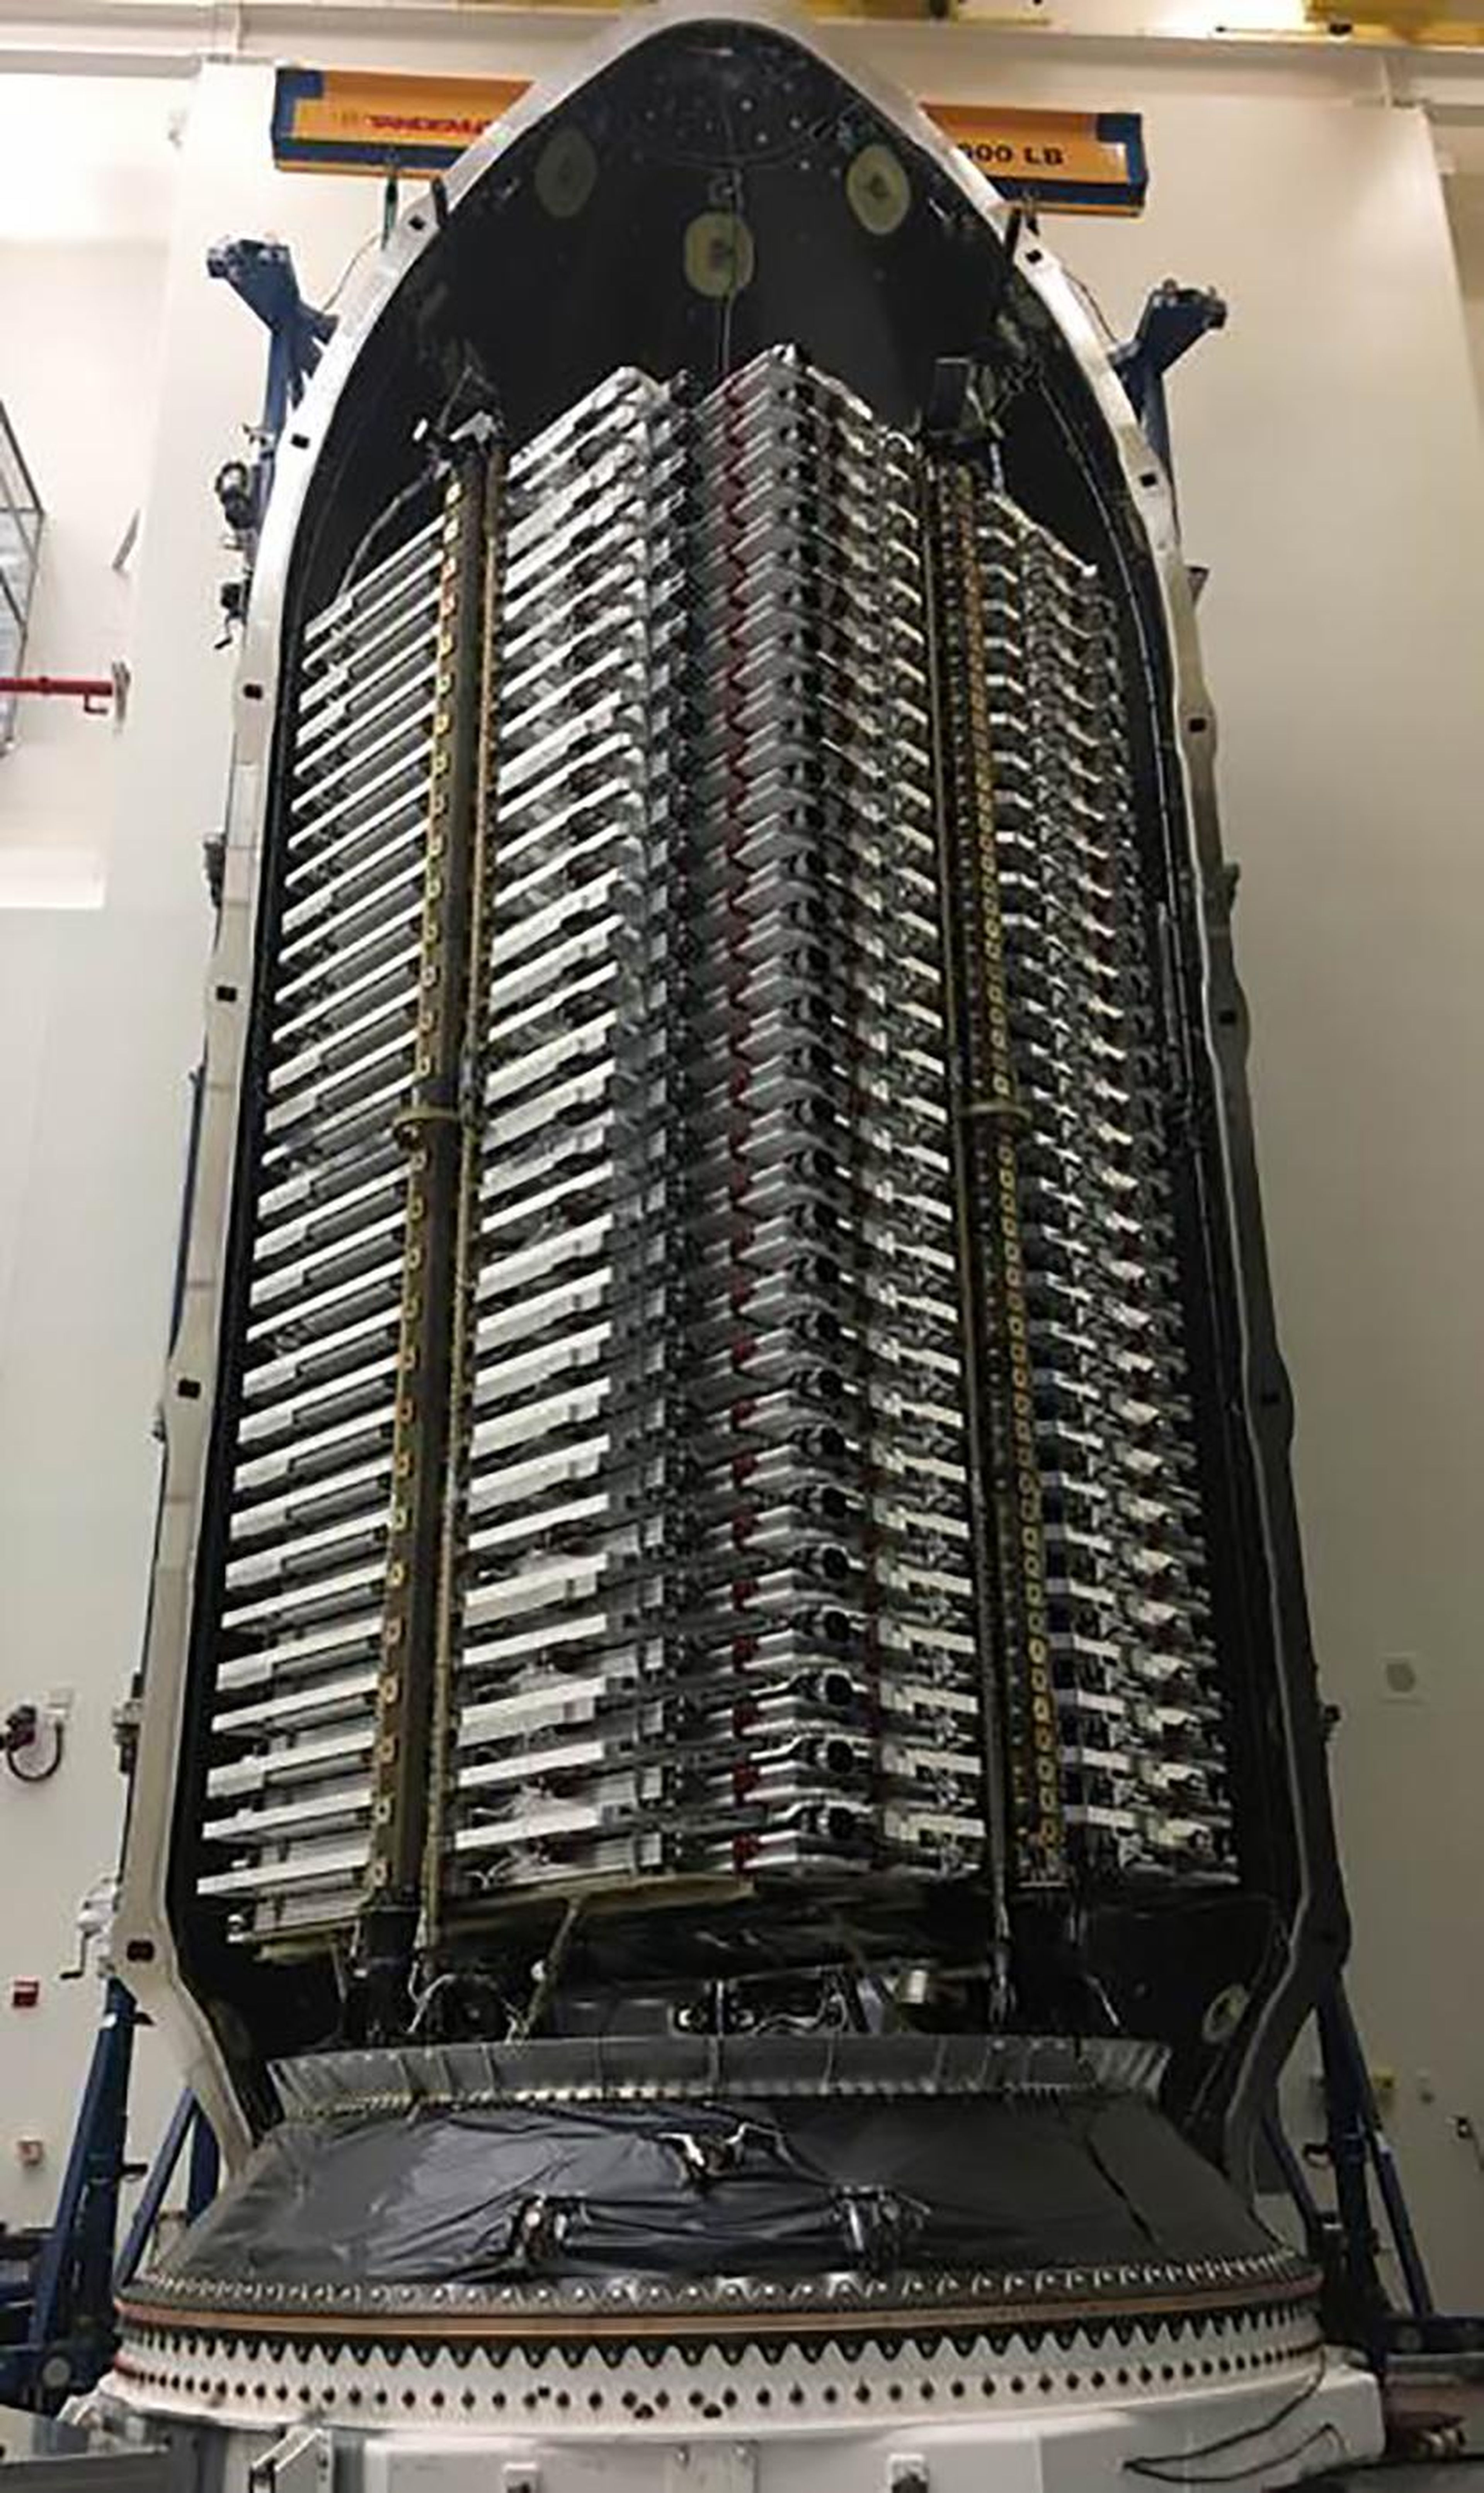 A fleet of 60 Starlink internet-providing satellites stuffed into the nosecone of a SpaceX Falcon 9 rocket.